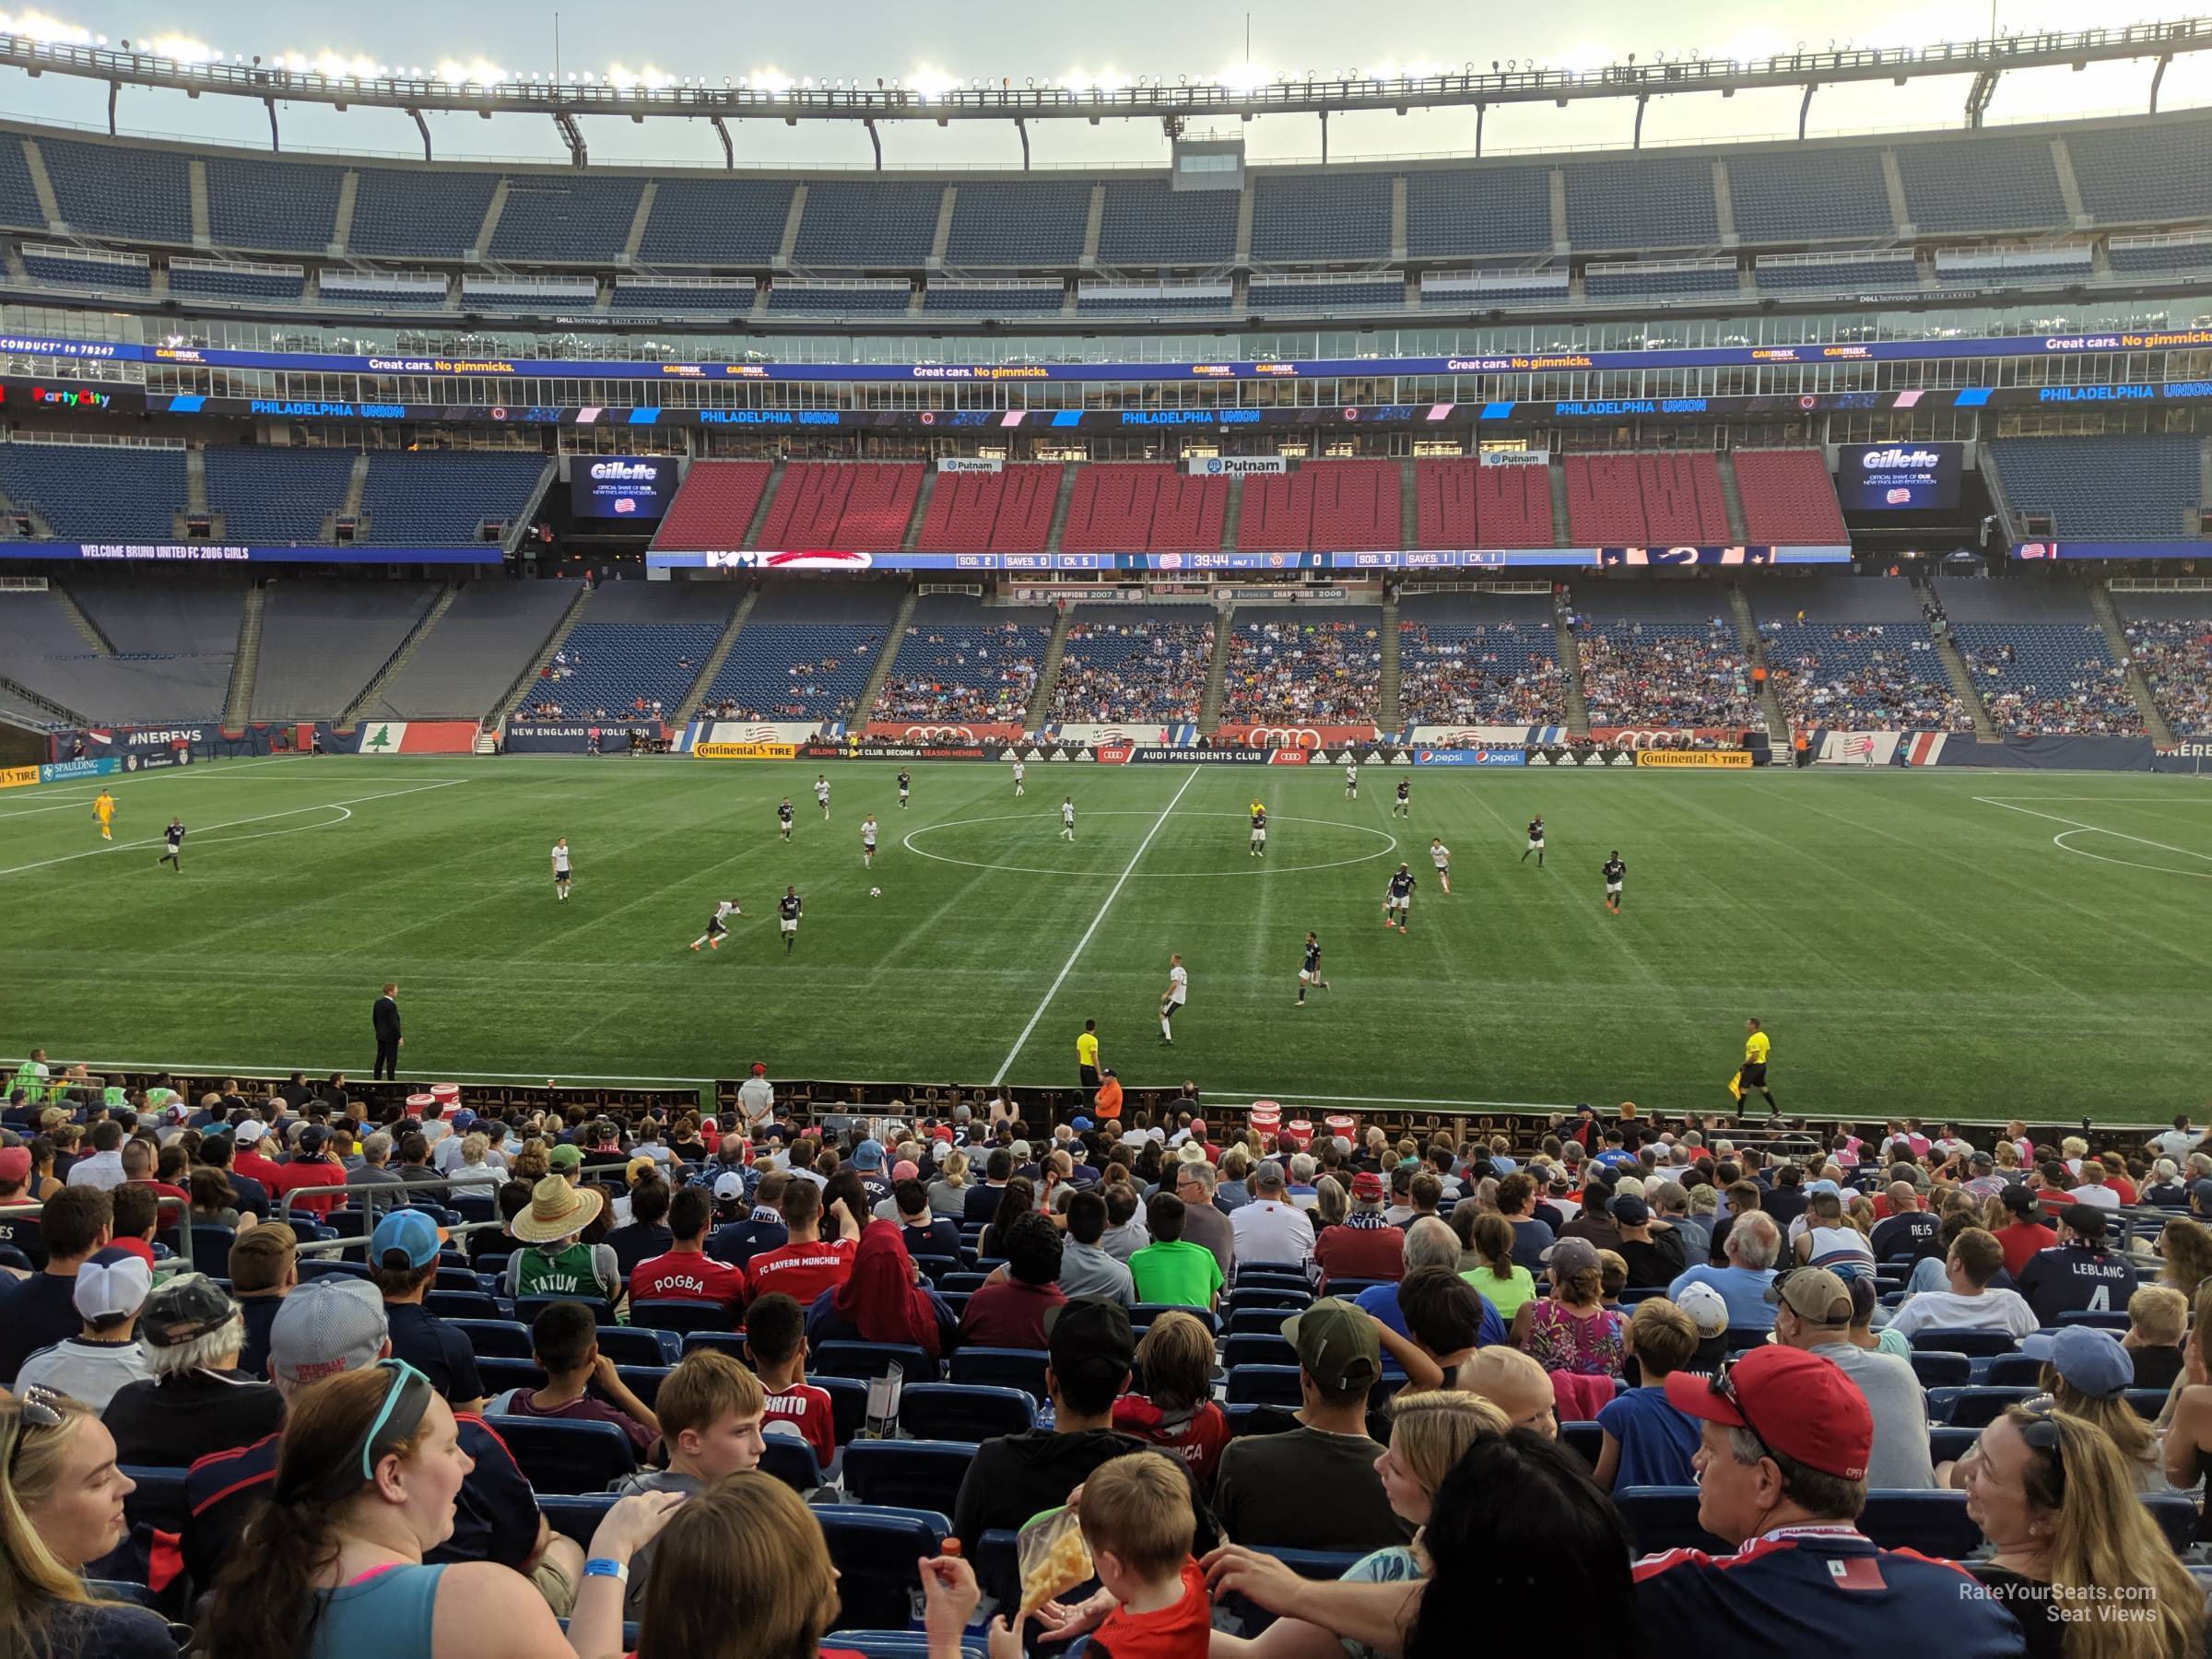 Section 109 at Gillette Stadium